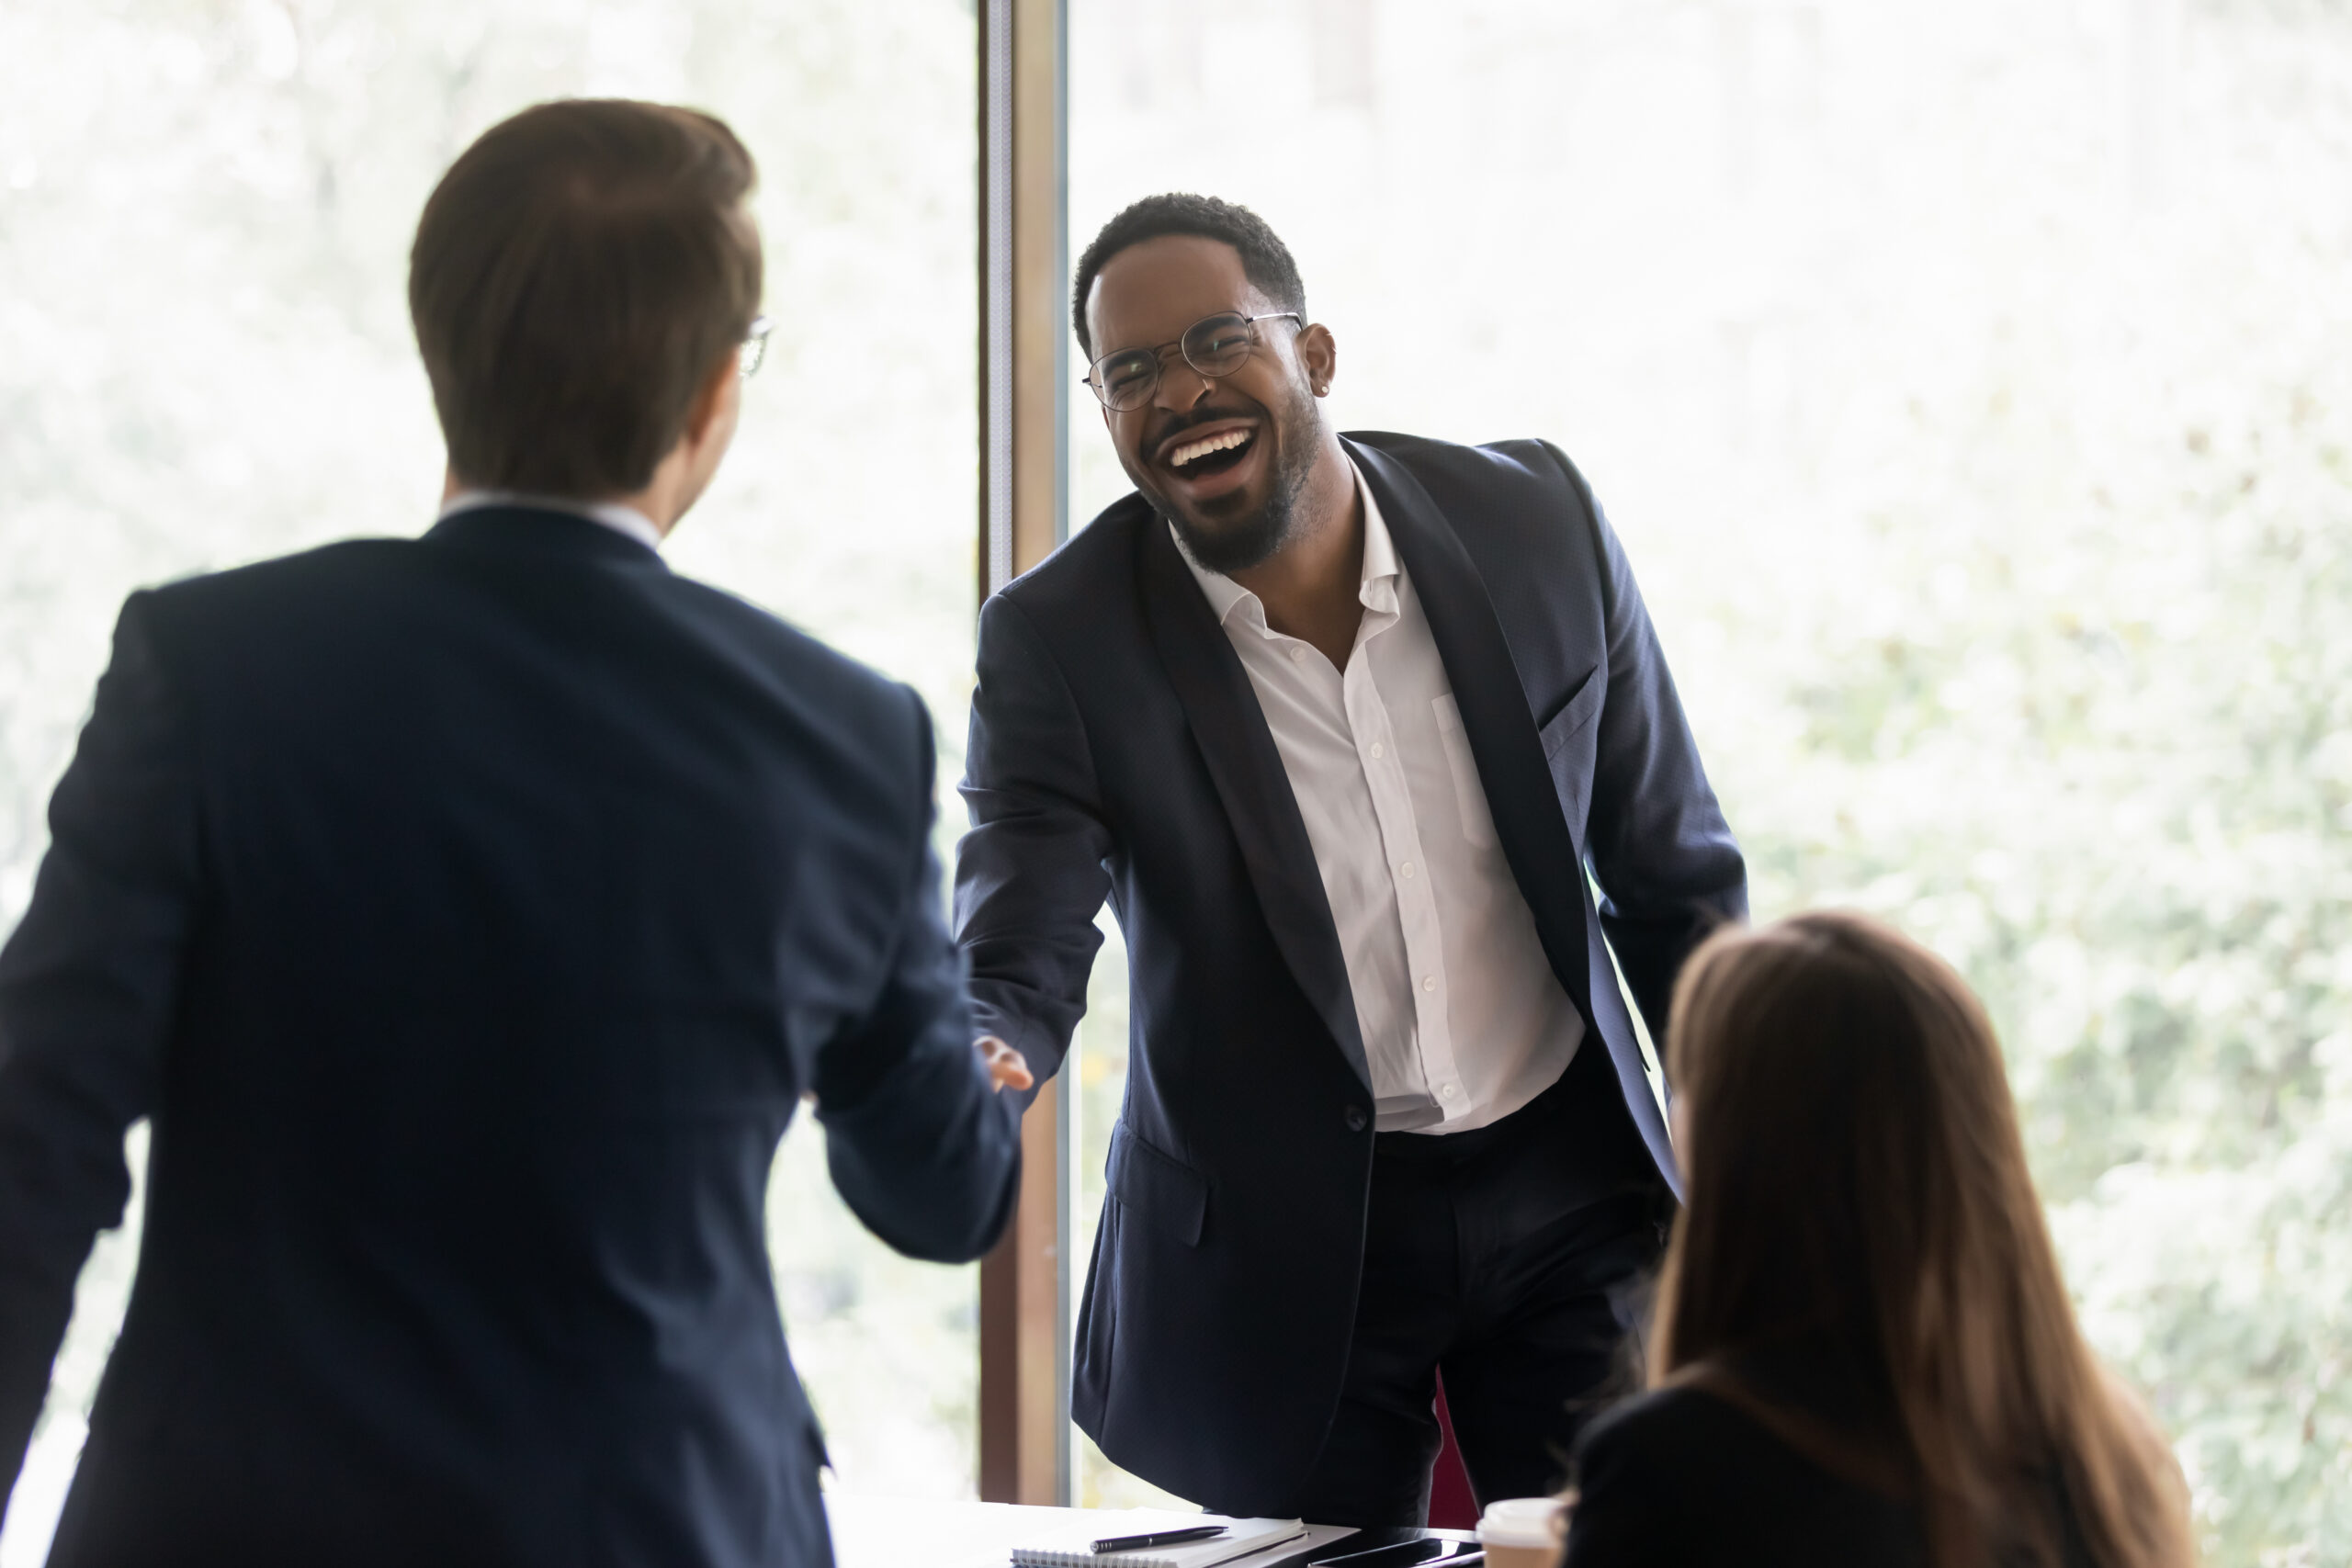 Happy diverse business leader and client shaking hands on meeting. Confident lawyer, bank employee, broker giving handshake to investor, partner. Employer hiring job candidate after interview